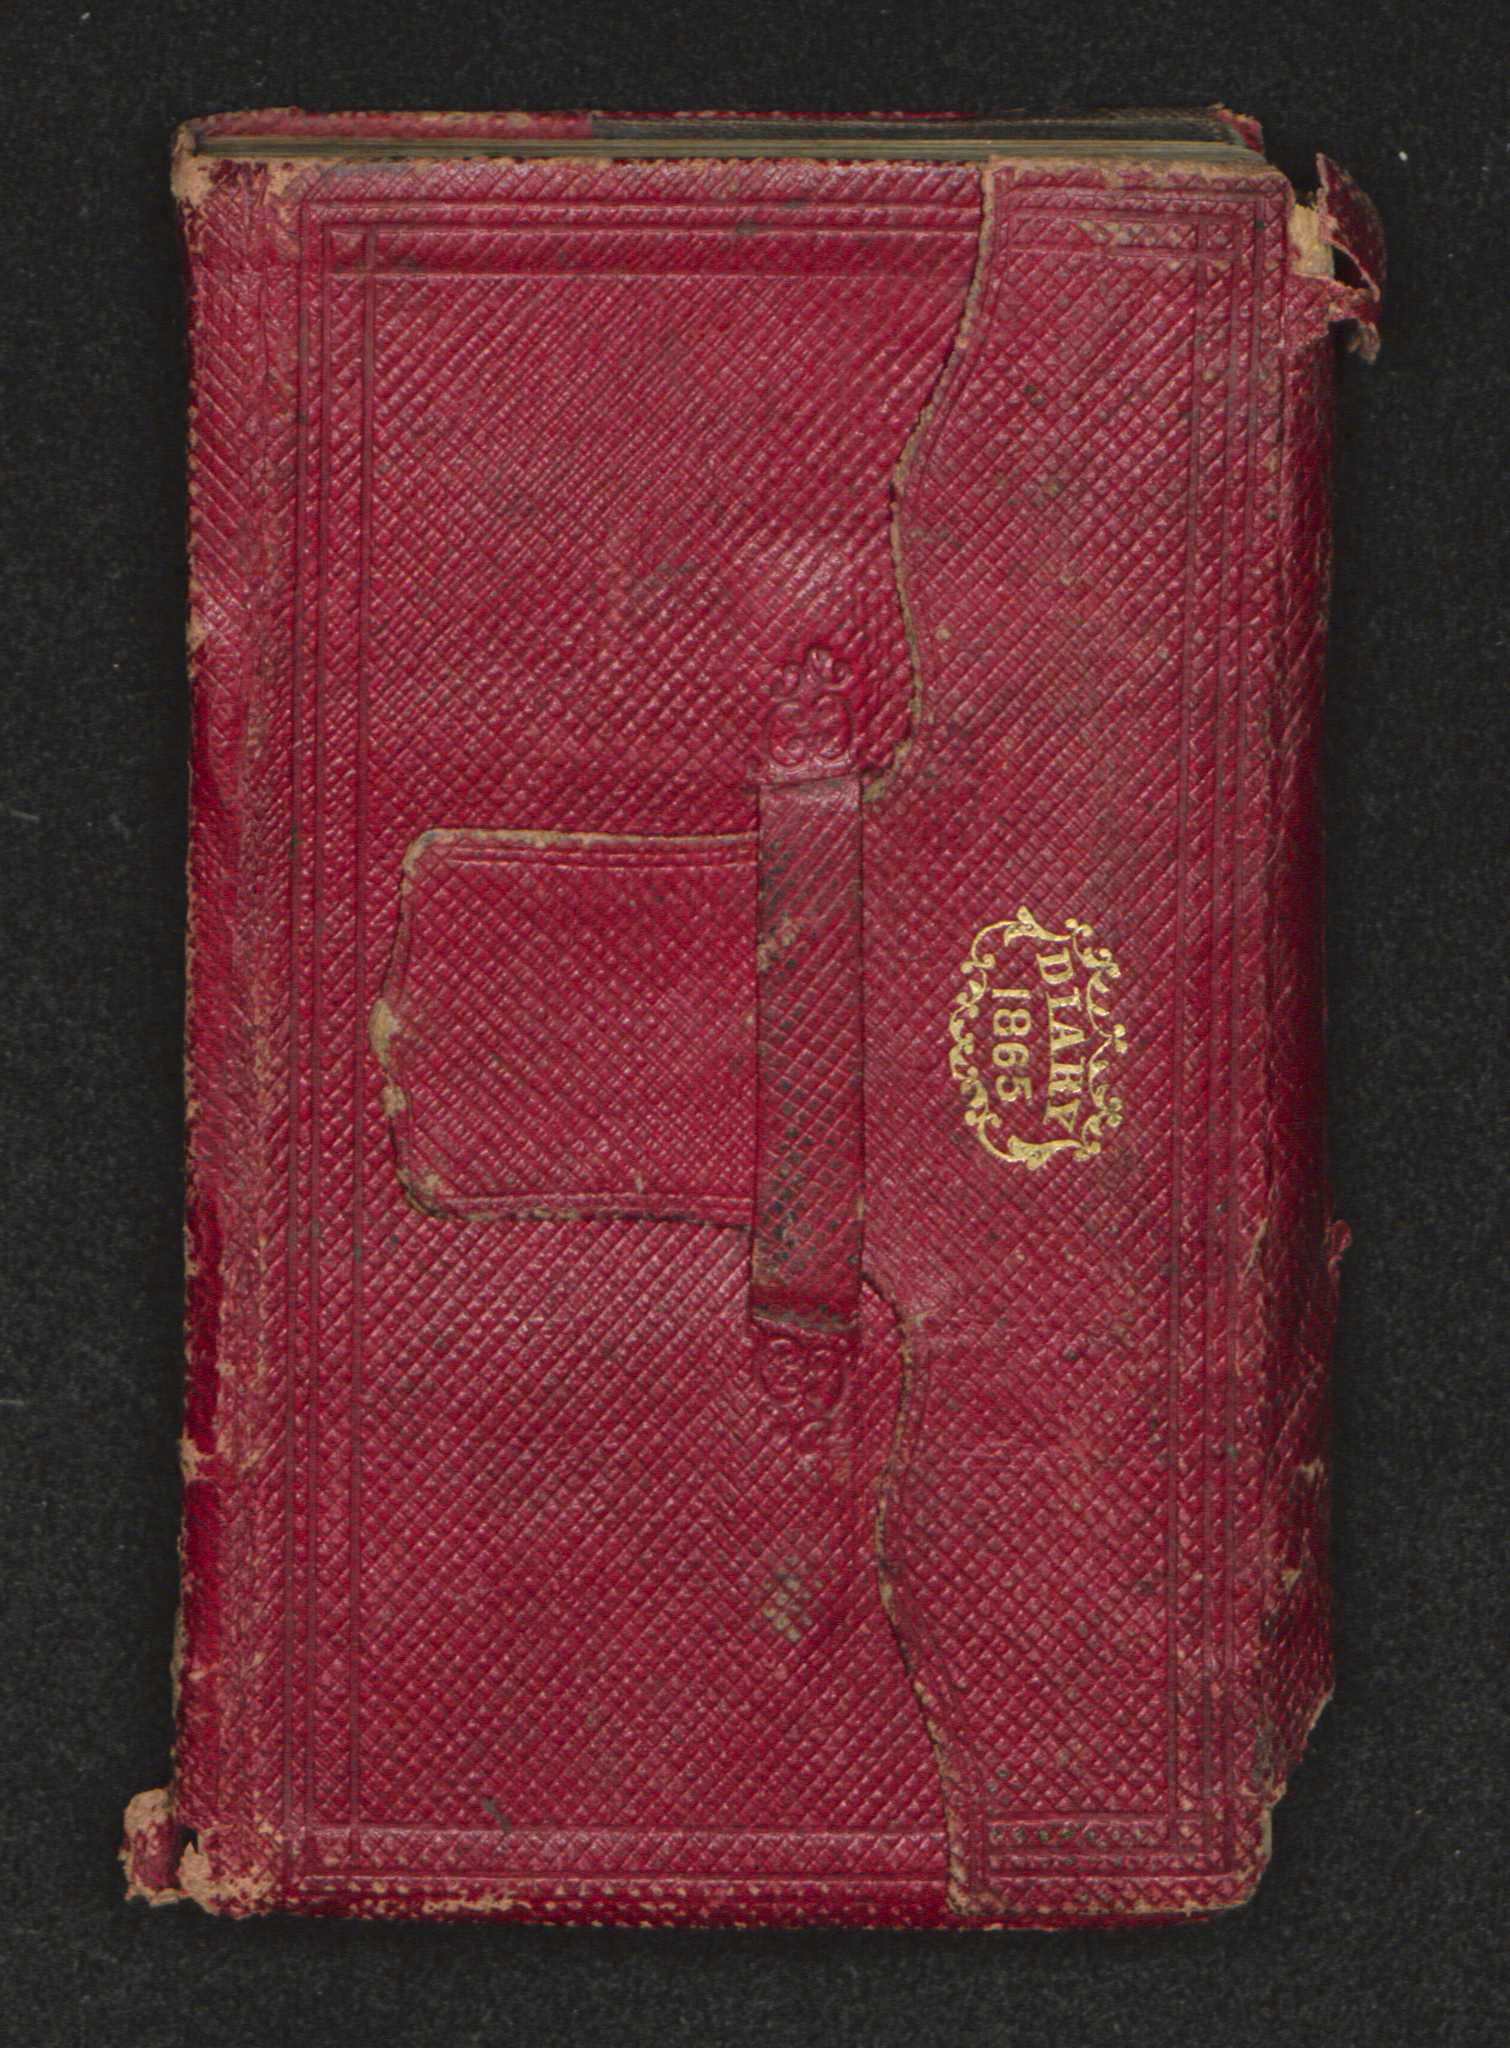 A handwritten diary encased in a red leather cover with "Diary / 1865" embossed in gold lettering at top center surrounded by an ornate wreath. The diary is inscribed on the front endpaper in both pencil and ink. The diary begins with several printed pages including a page outlining eclipses that occurred in 1865, a calendar, a table of stamp duties and rates of postage.  The diary entries were done predominantly in pencil. The diary begins on January 1, 1865 with the last entry occurring on September 30, 1865. The diary ends with a memorandum section and an accounts paid section. Both of these sections were used by Lieutenant John Freeman Shorter. A back pocket in the back of the diary contains two loose sheets of paper. One of the pieces of paper is a promotion certification for a second lieutenant in the 55th Massachusetts volunteer regiment. The document is written in ink.  It is dated April 19, 1865. Additional notes are written in pencil on the other side of the document. The second piece of paper has a list of people’s names, dollar amounts and dates written on both sides in both ink and pencil.